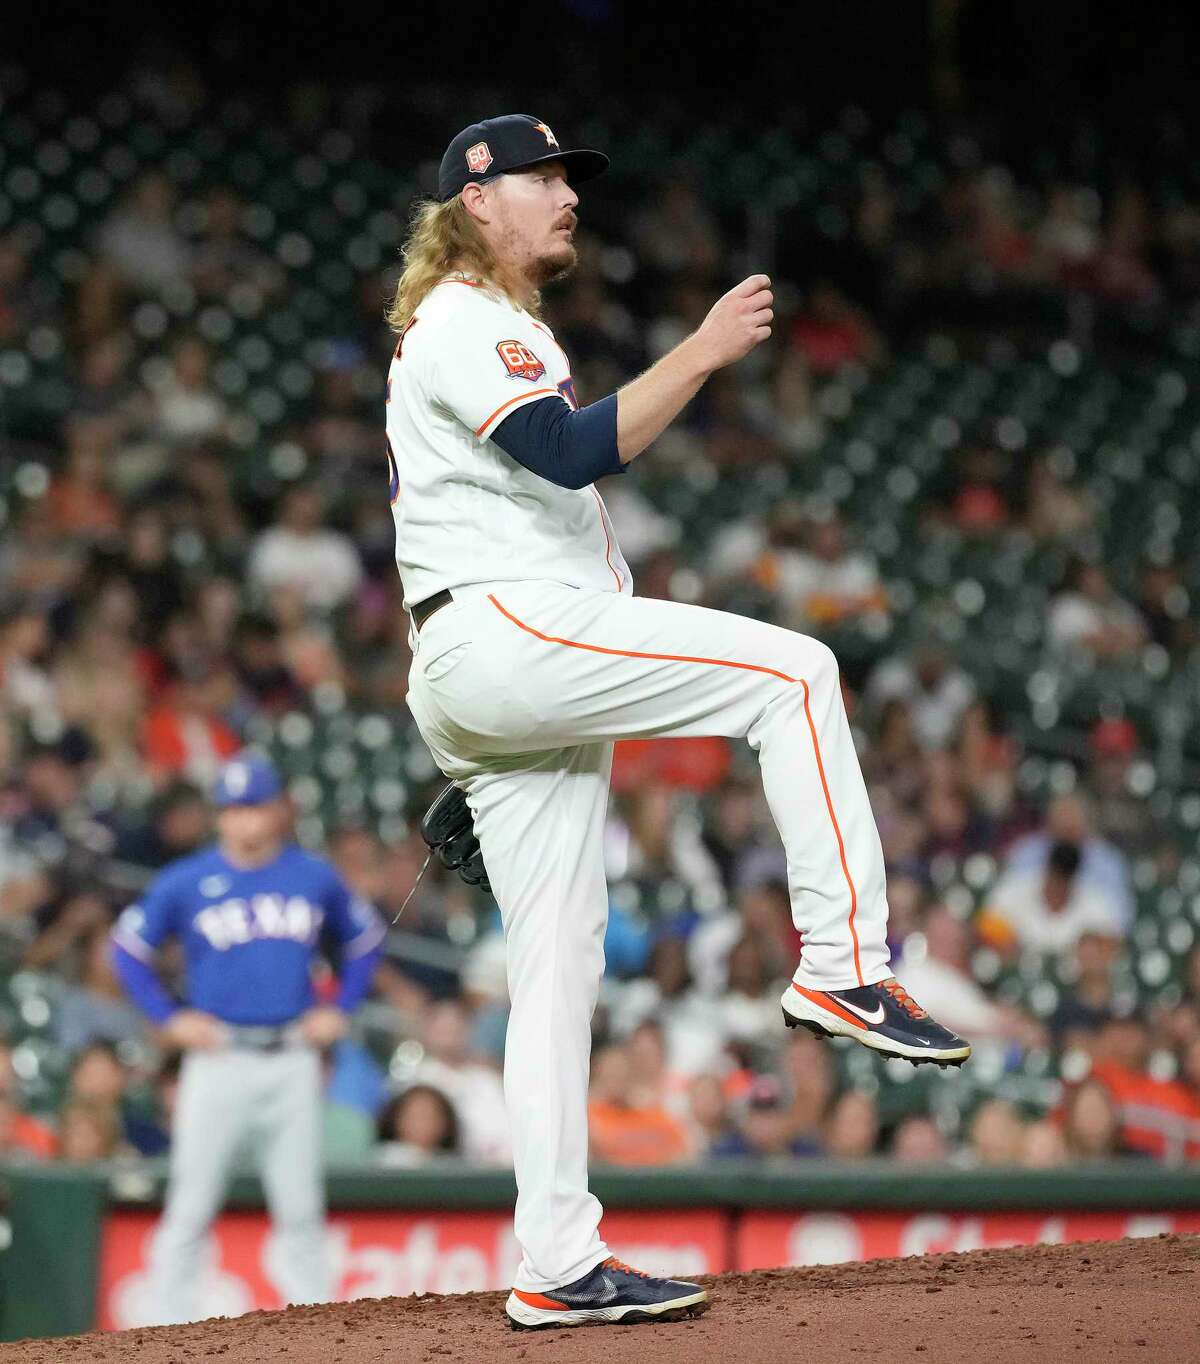 Houston Astros relief pitcher Ryne Stanek (45) reacts after striking out Texas Rangers Bubba Thompson during the eighth inning of an MLB baseball game at Minute Maid Park on Tuesday, Sept. 6, 2022 in Houston.